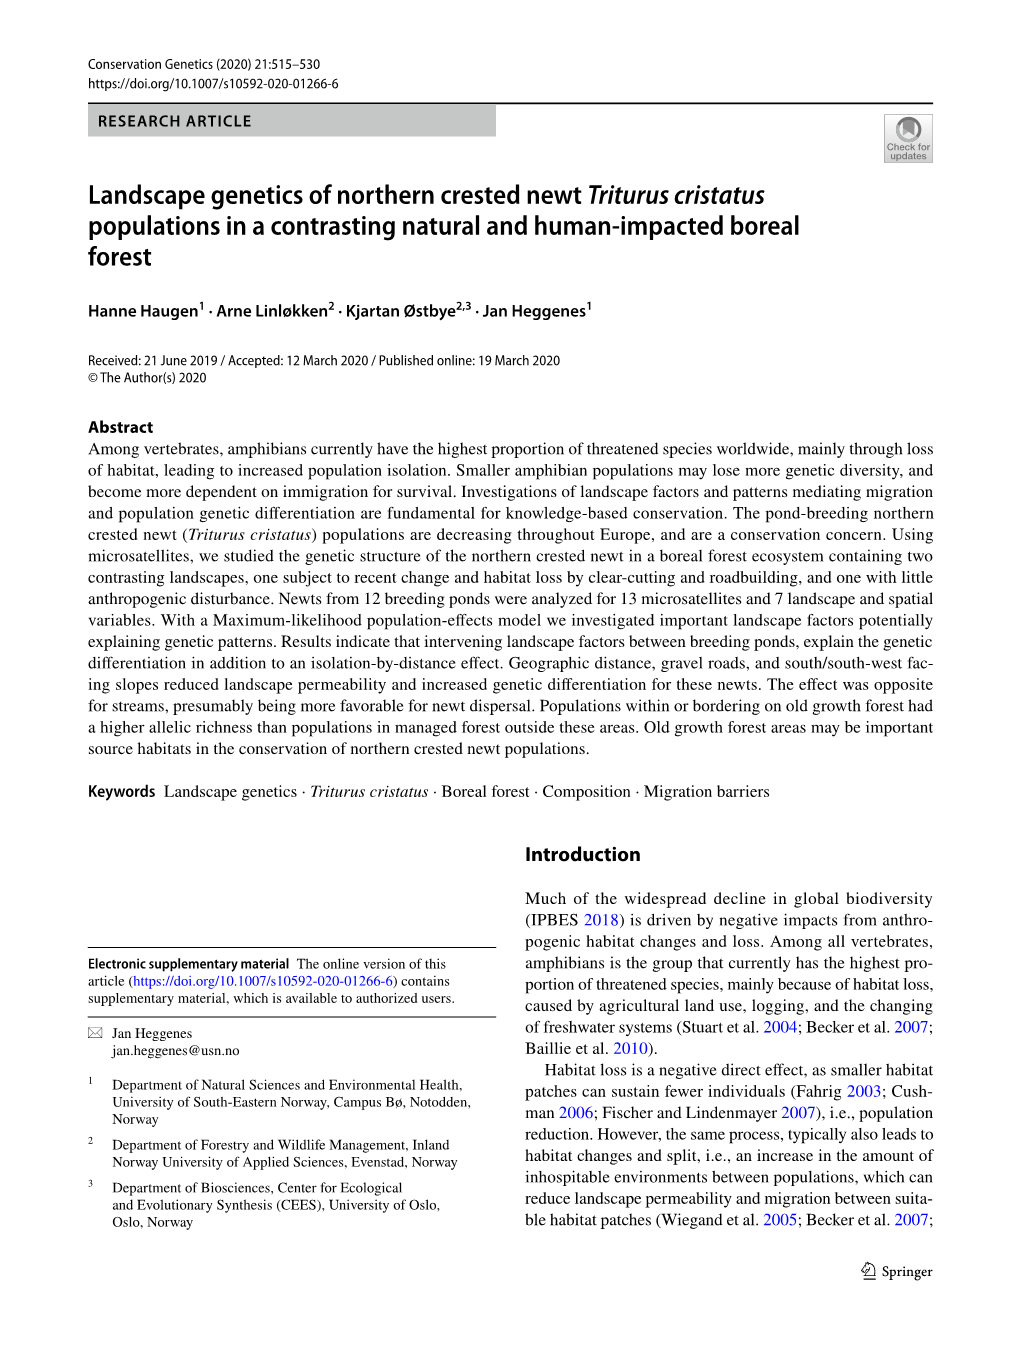 Landscape Genetics of Northern Crested Newt Triturus Cristatus Populations in a Contrasting Natural and Human‑Impacted Boreal Forest